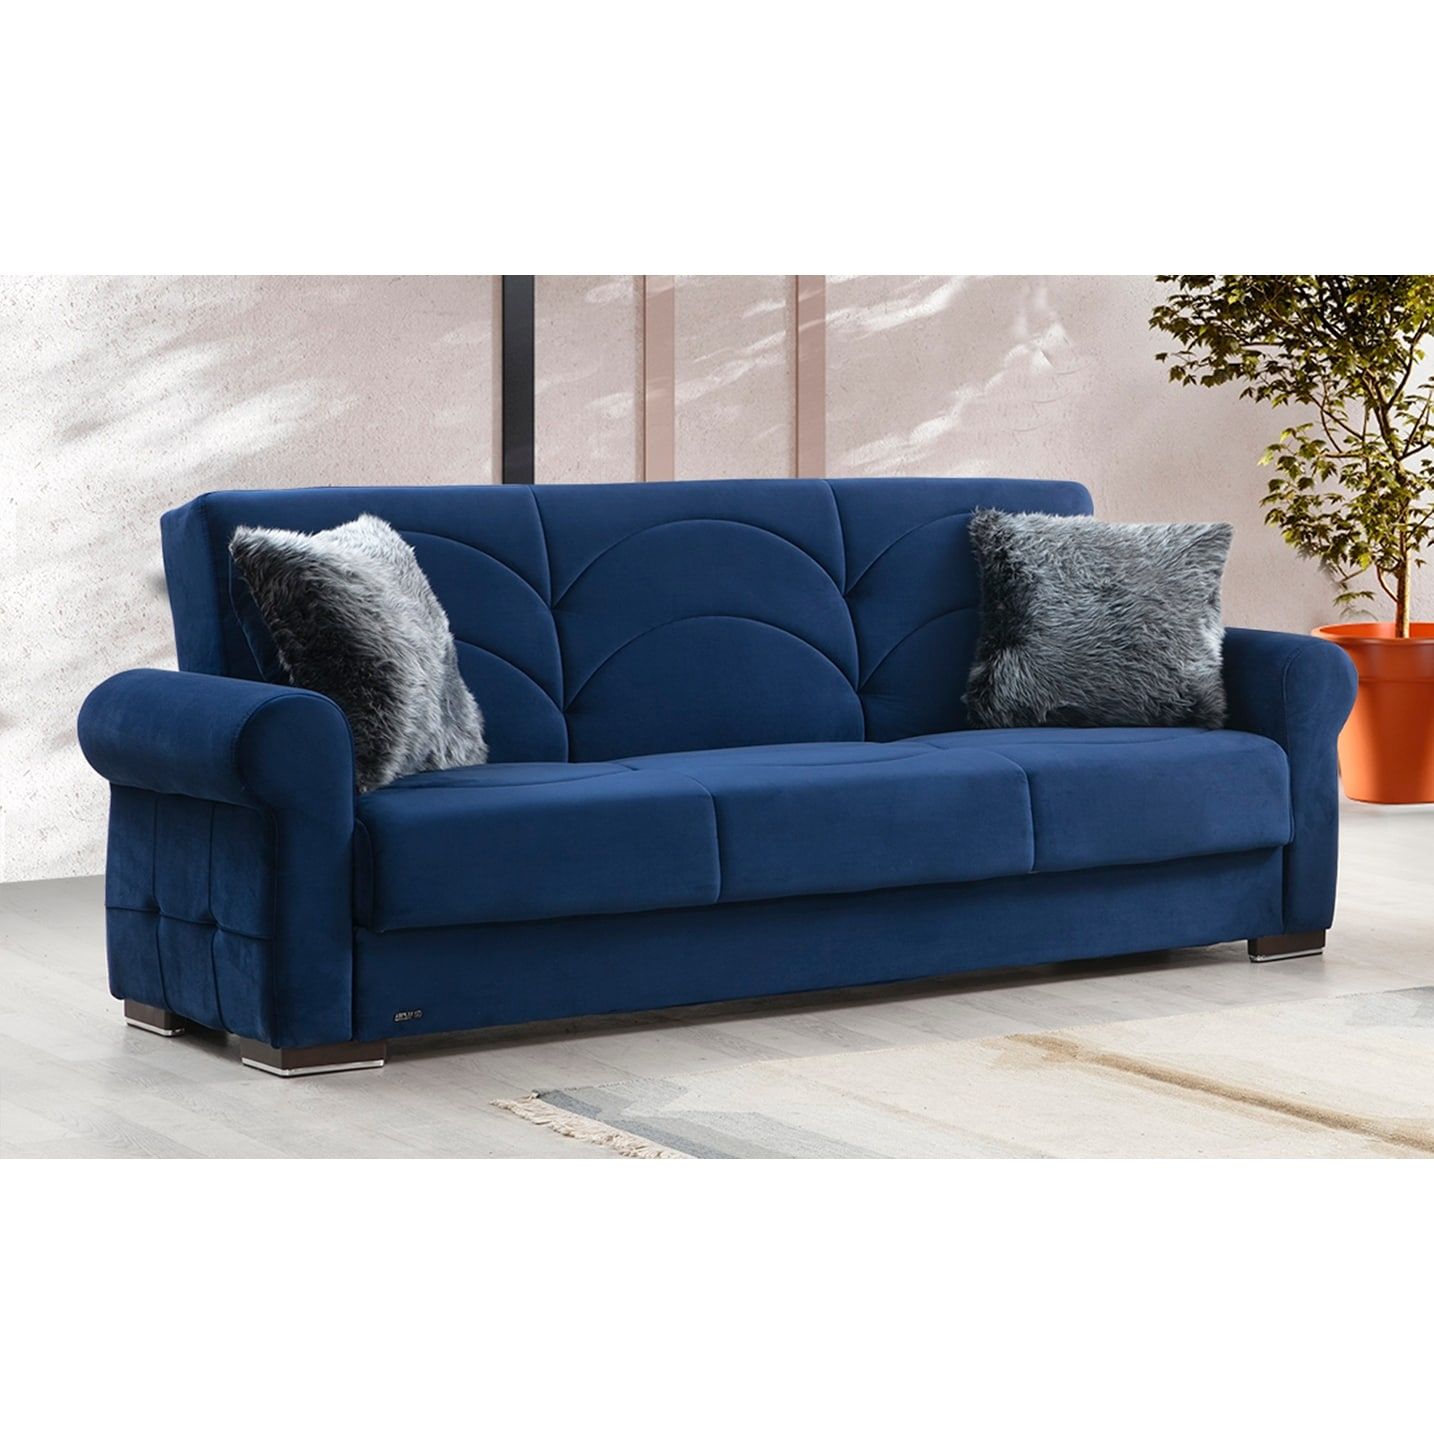 Amarillo Blue Velvet Upholstered Convertible Sleeper Sofa With Storage –  Bed Bath & Beyond – 32400353 Within Tufted Convertible Sleeper Sofas (View 15 of 15)